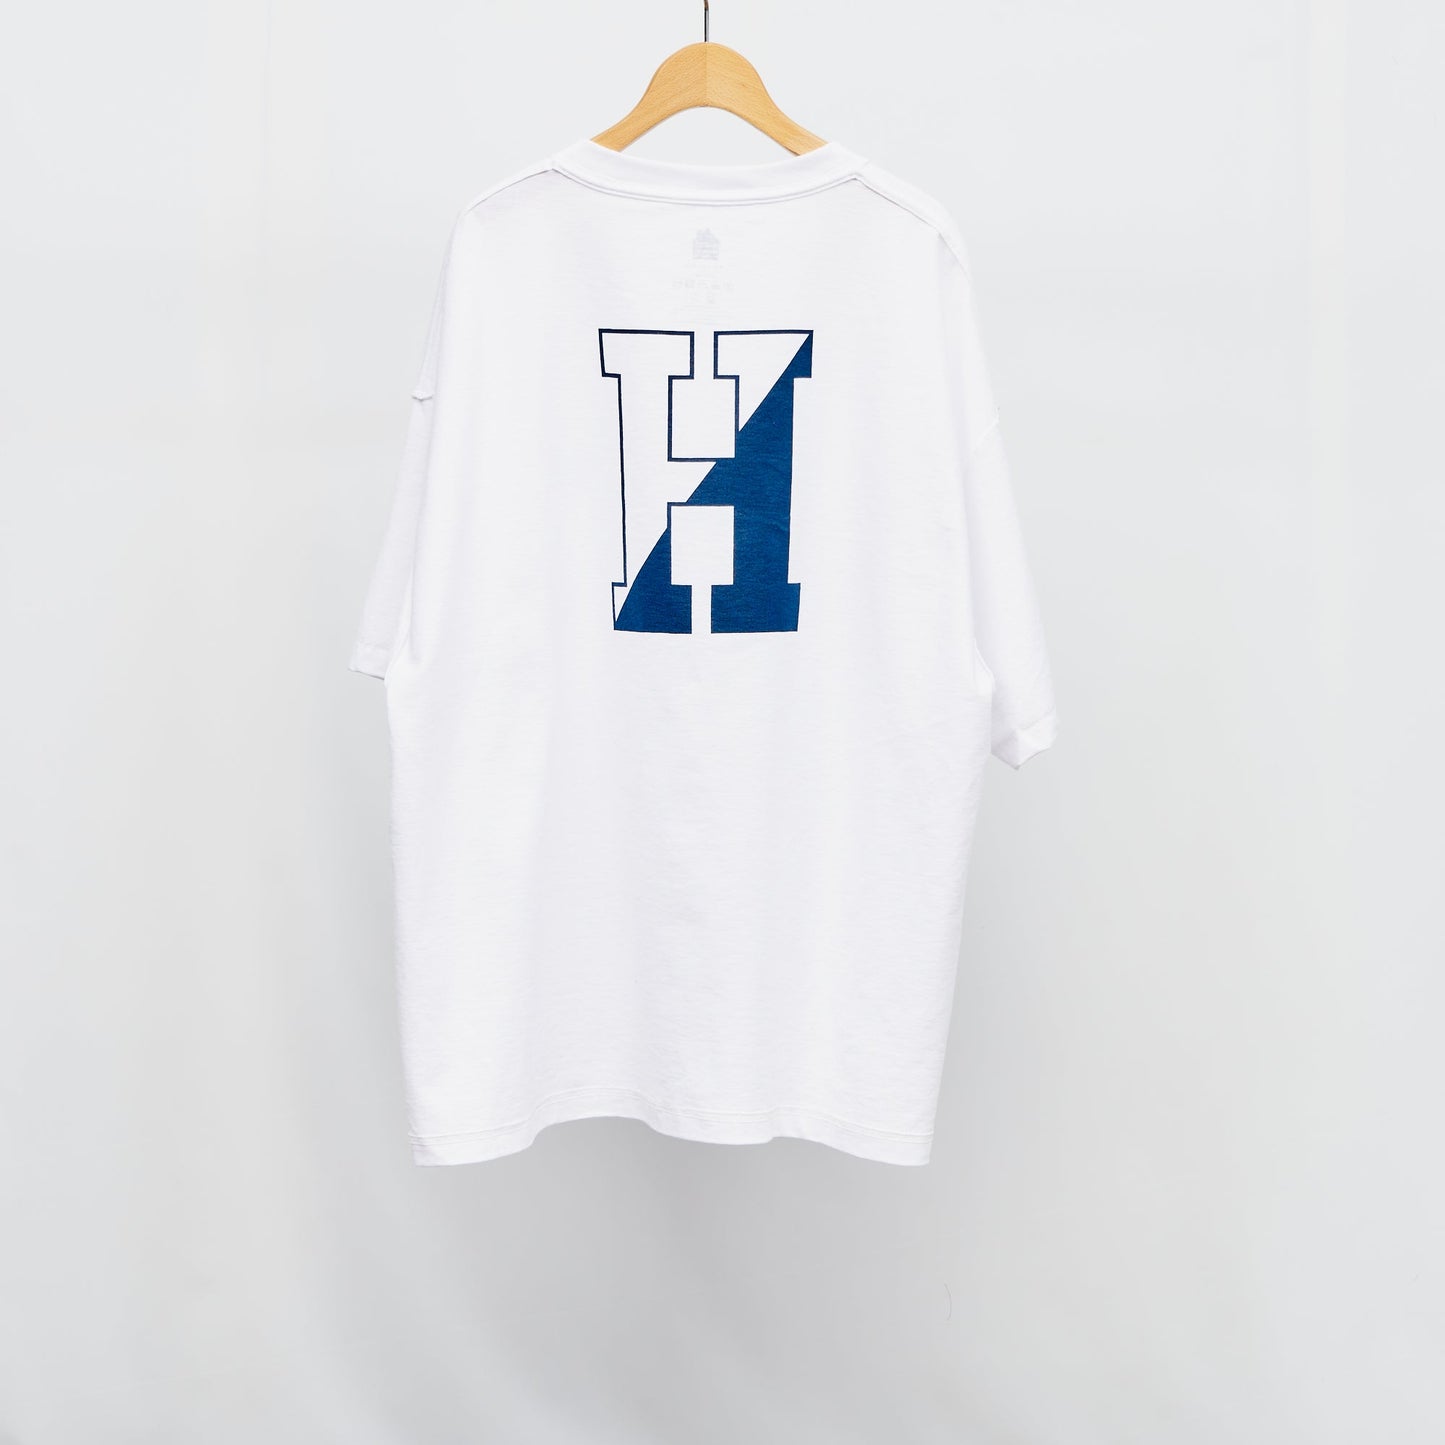 HOUSE S/S T-SHIRTS is-ness online shop 3